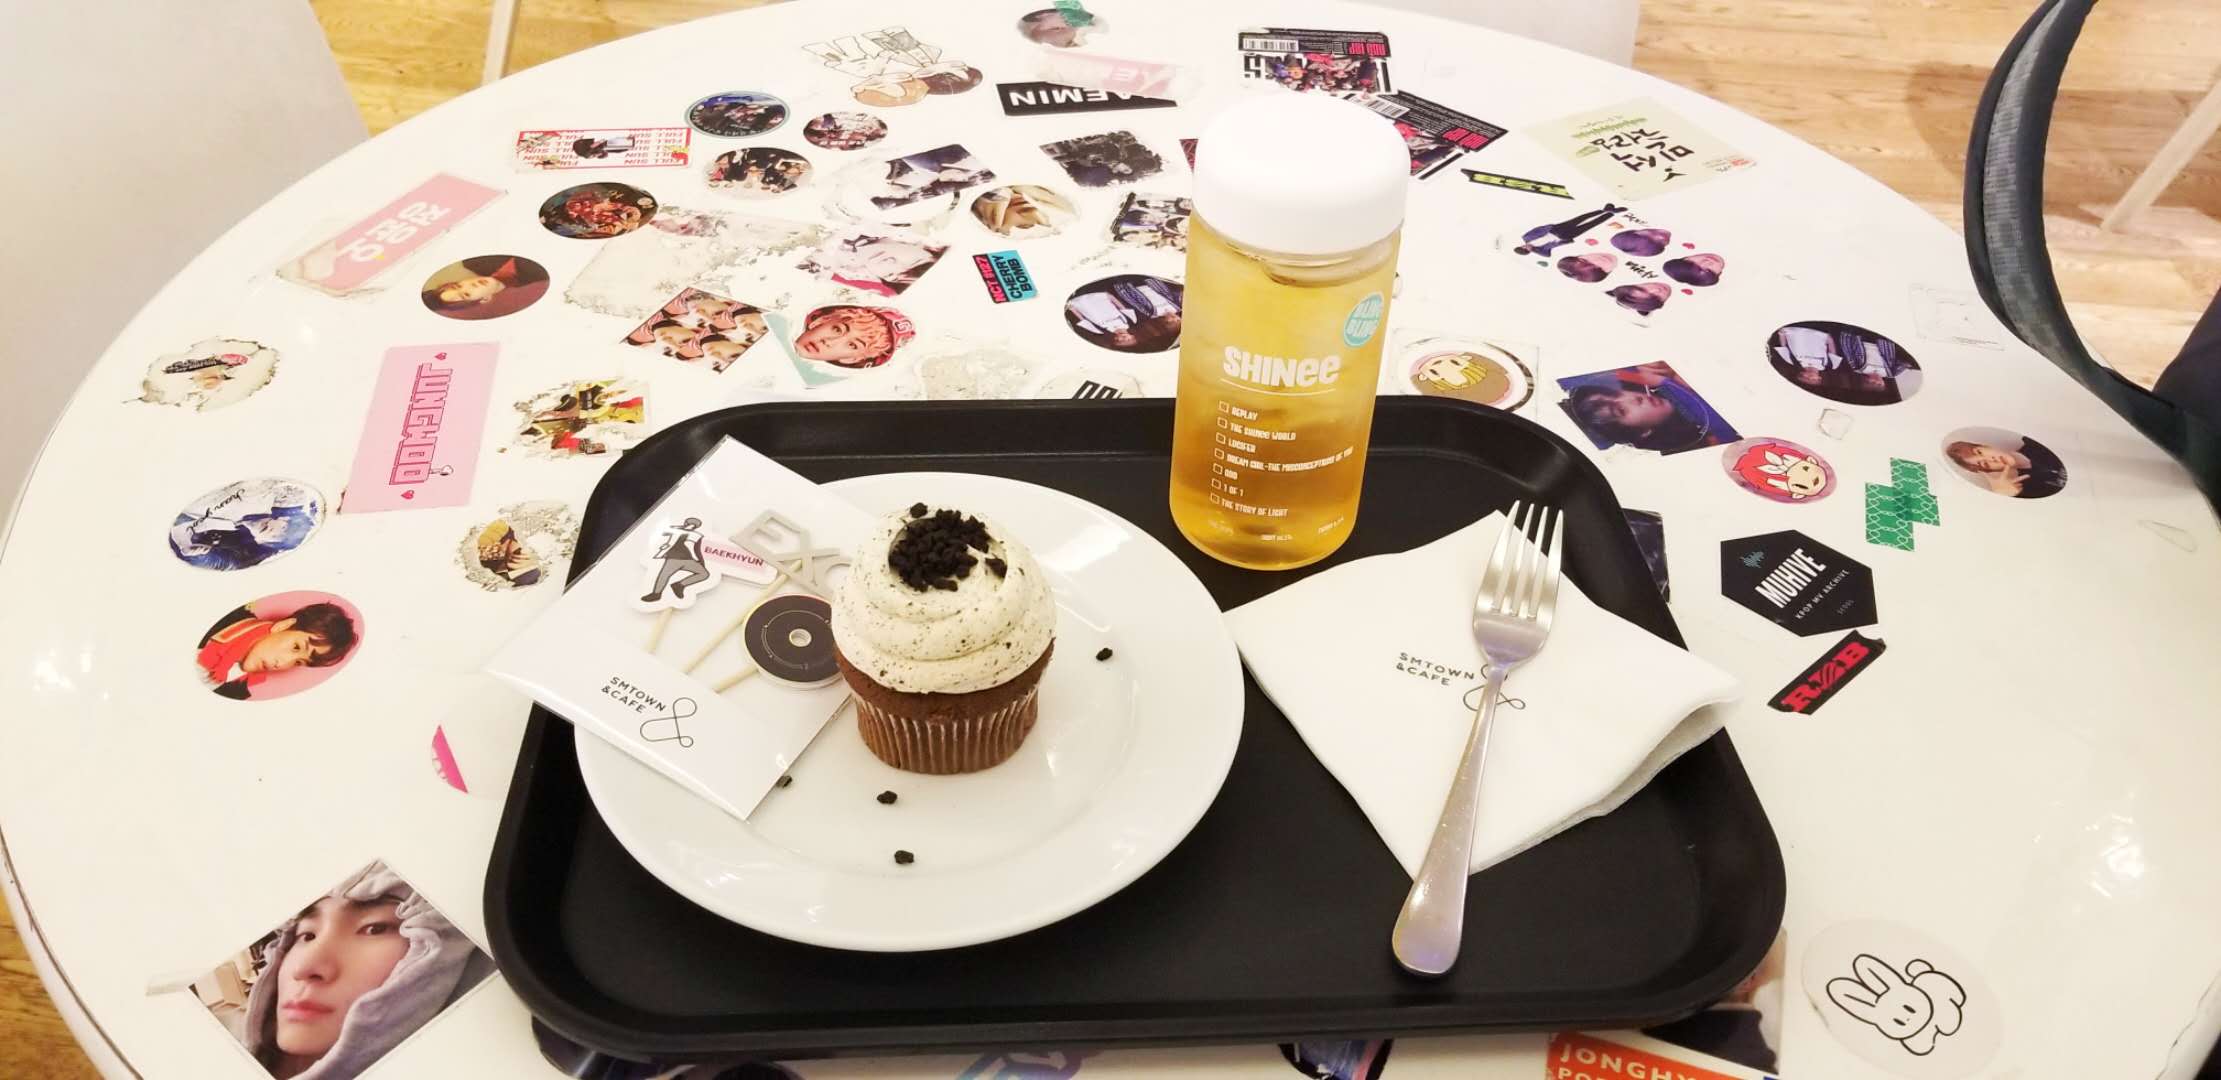 My food from the SMTown Cafe